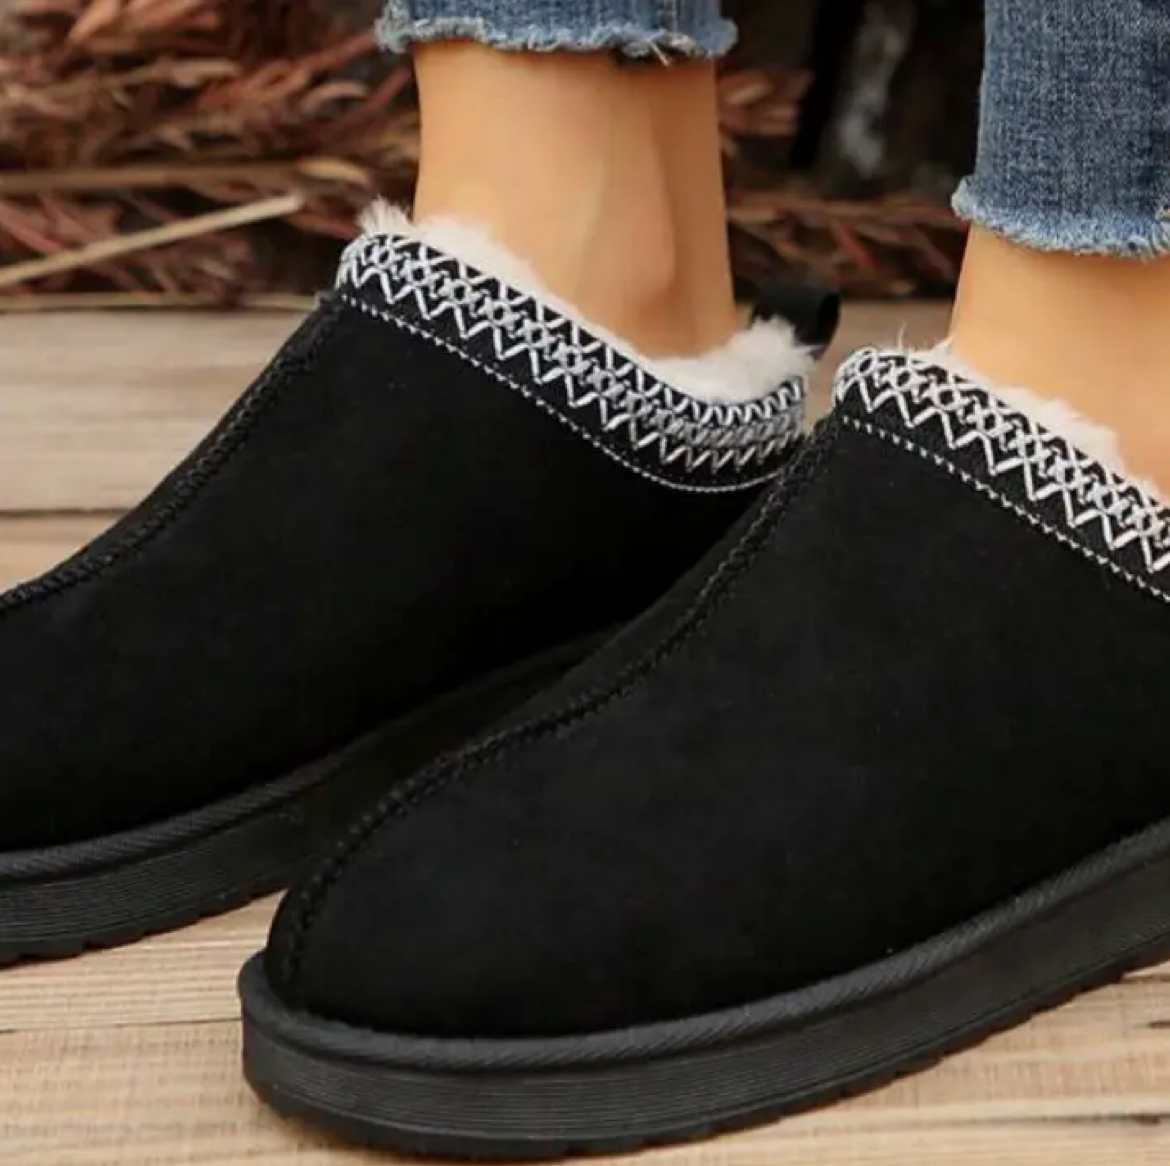 Fur Lined Slip On Shoes - red trim